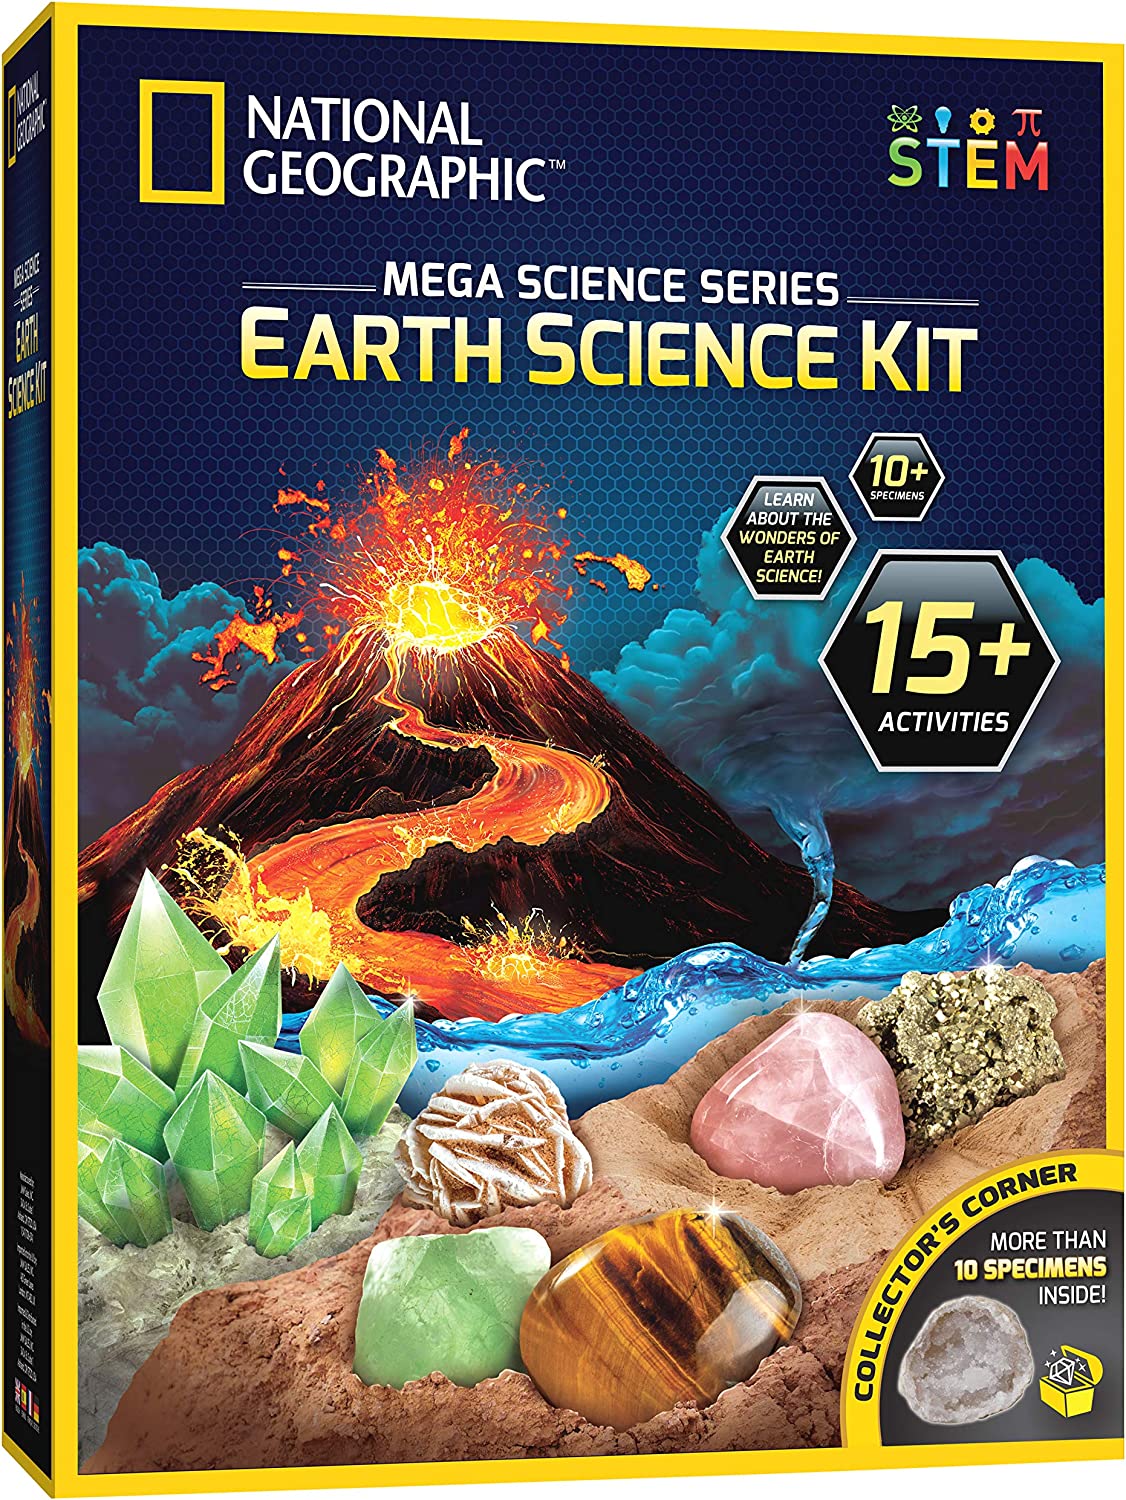 These National Geographic geology set deals rock